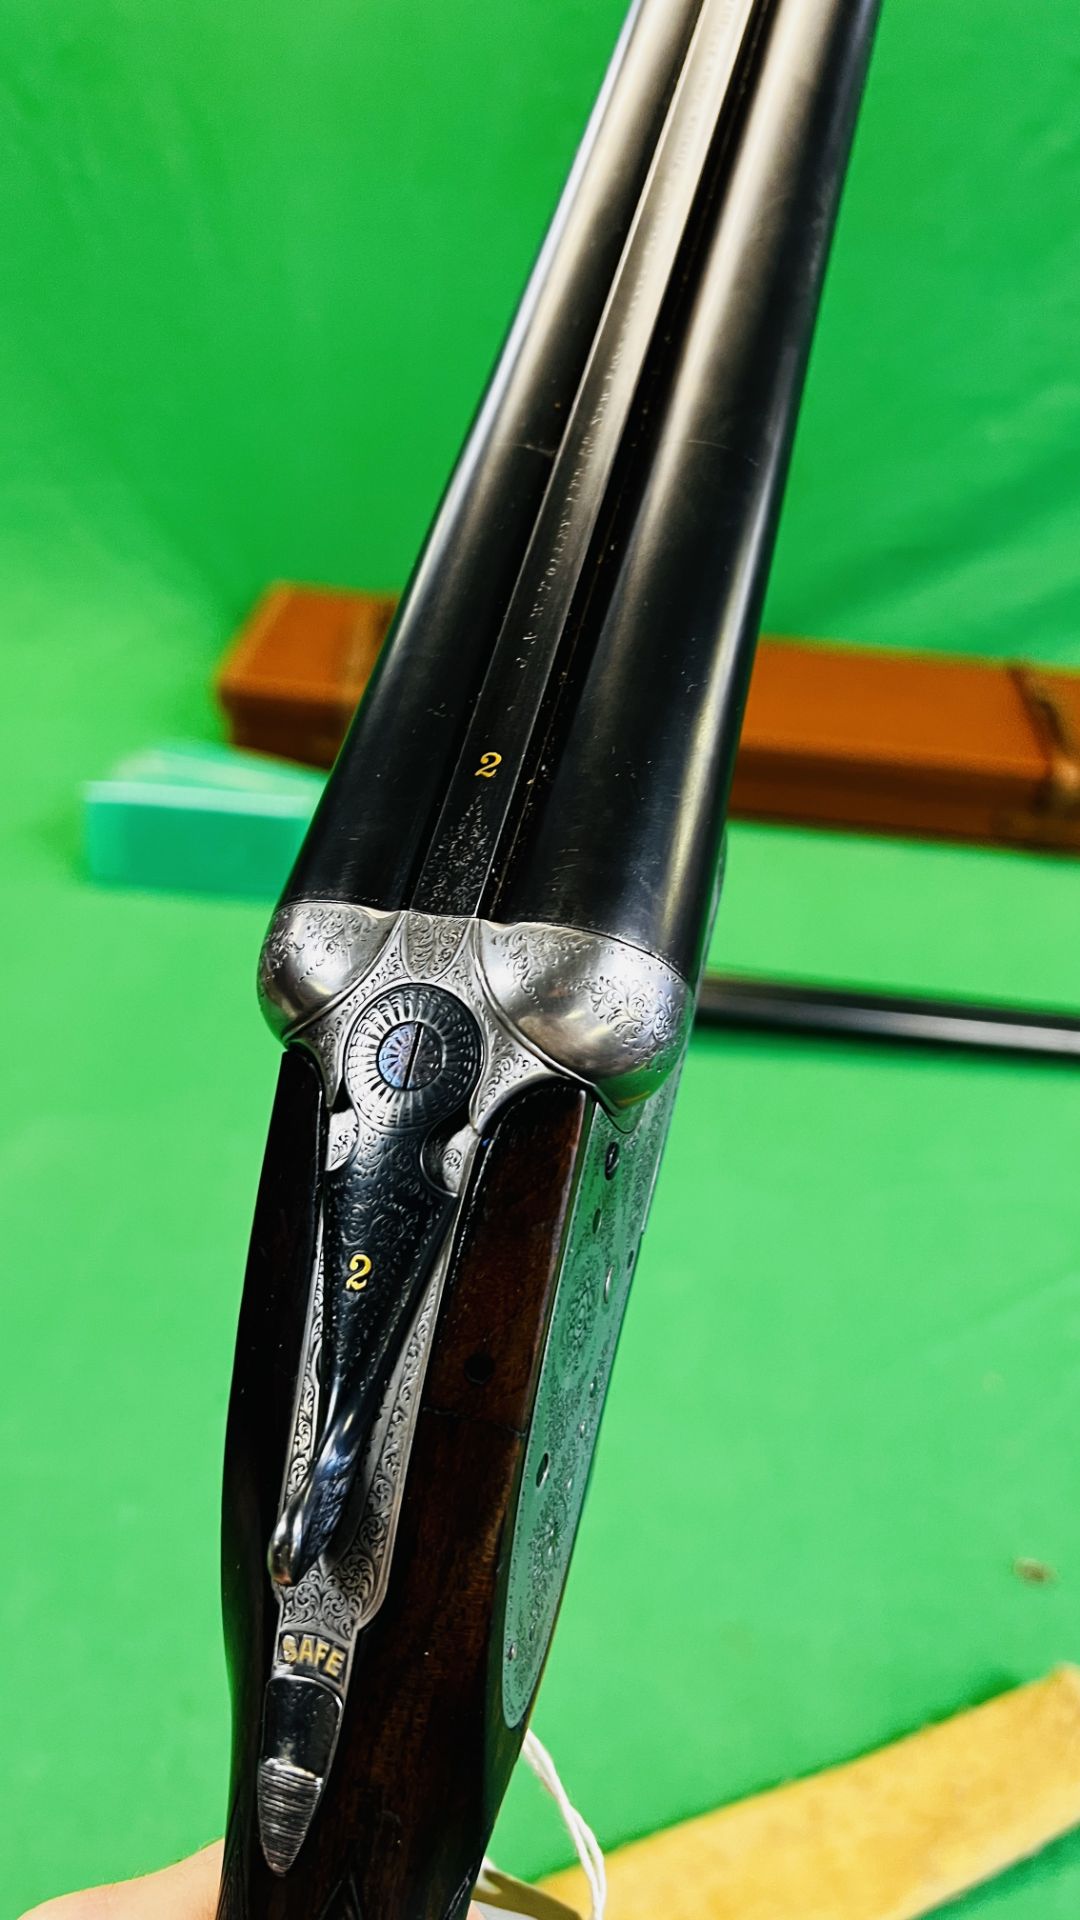 12 BORE TOLLEY SIDE BY SIDE SHOTGUN #8670, 28" BARRELS (2 3/4" CHAMBER), EJECTOR, - Image 28 of 37